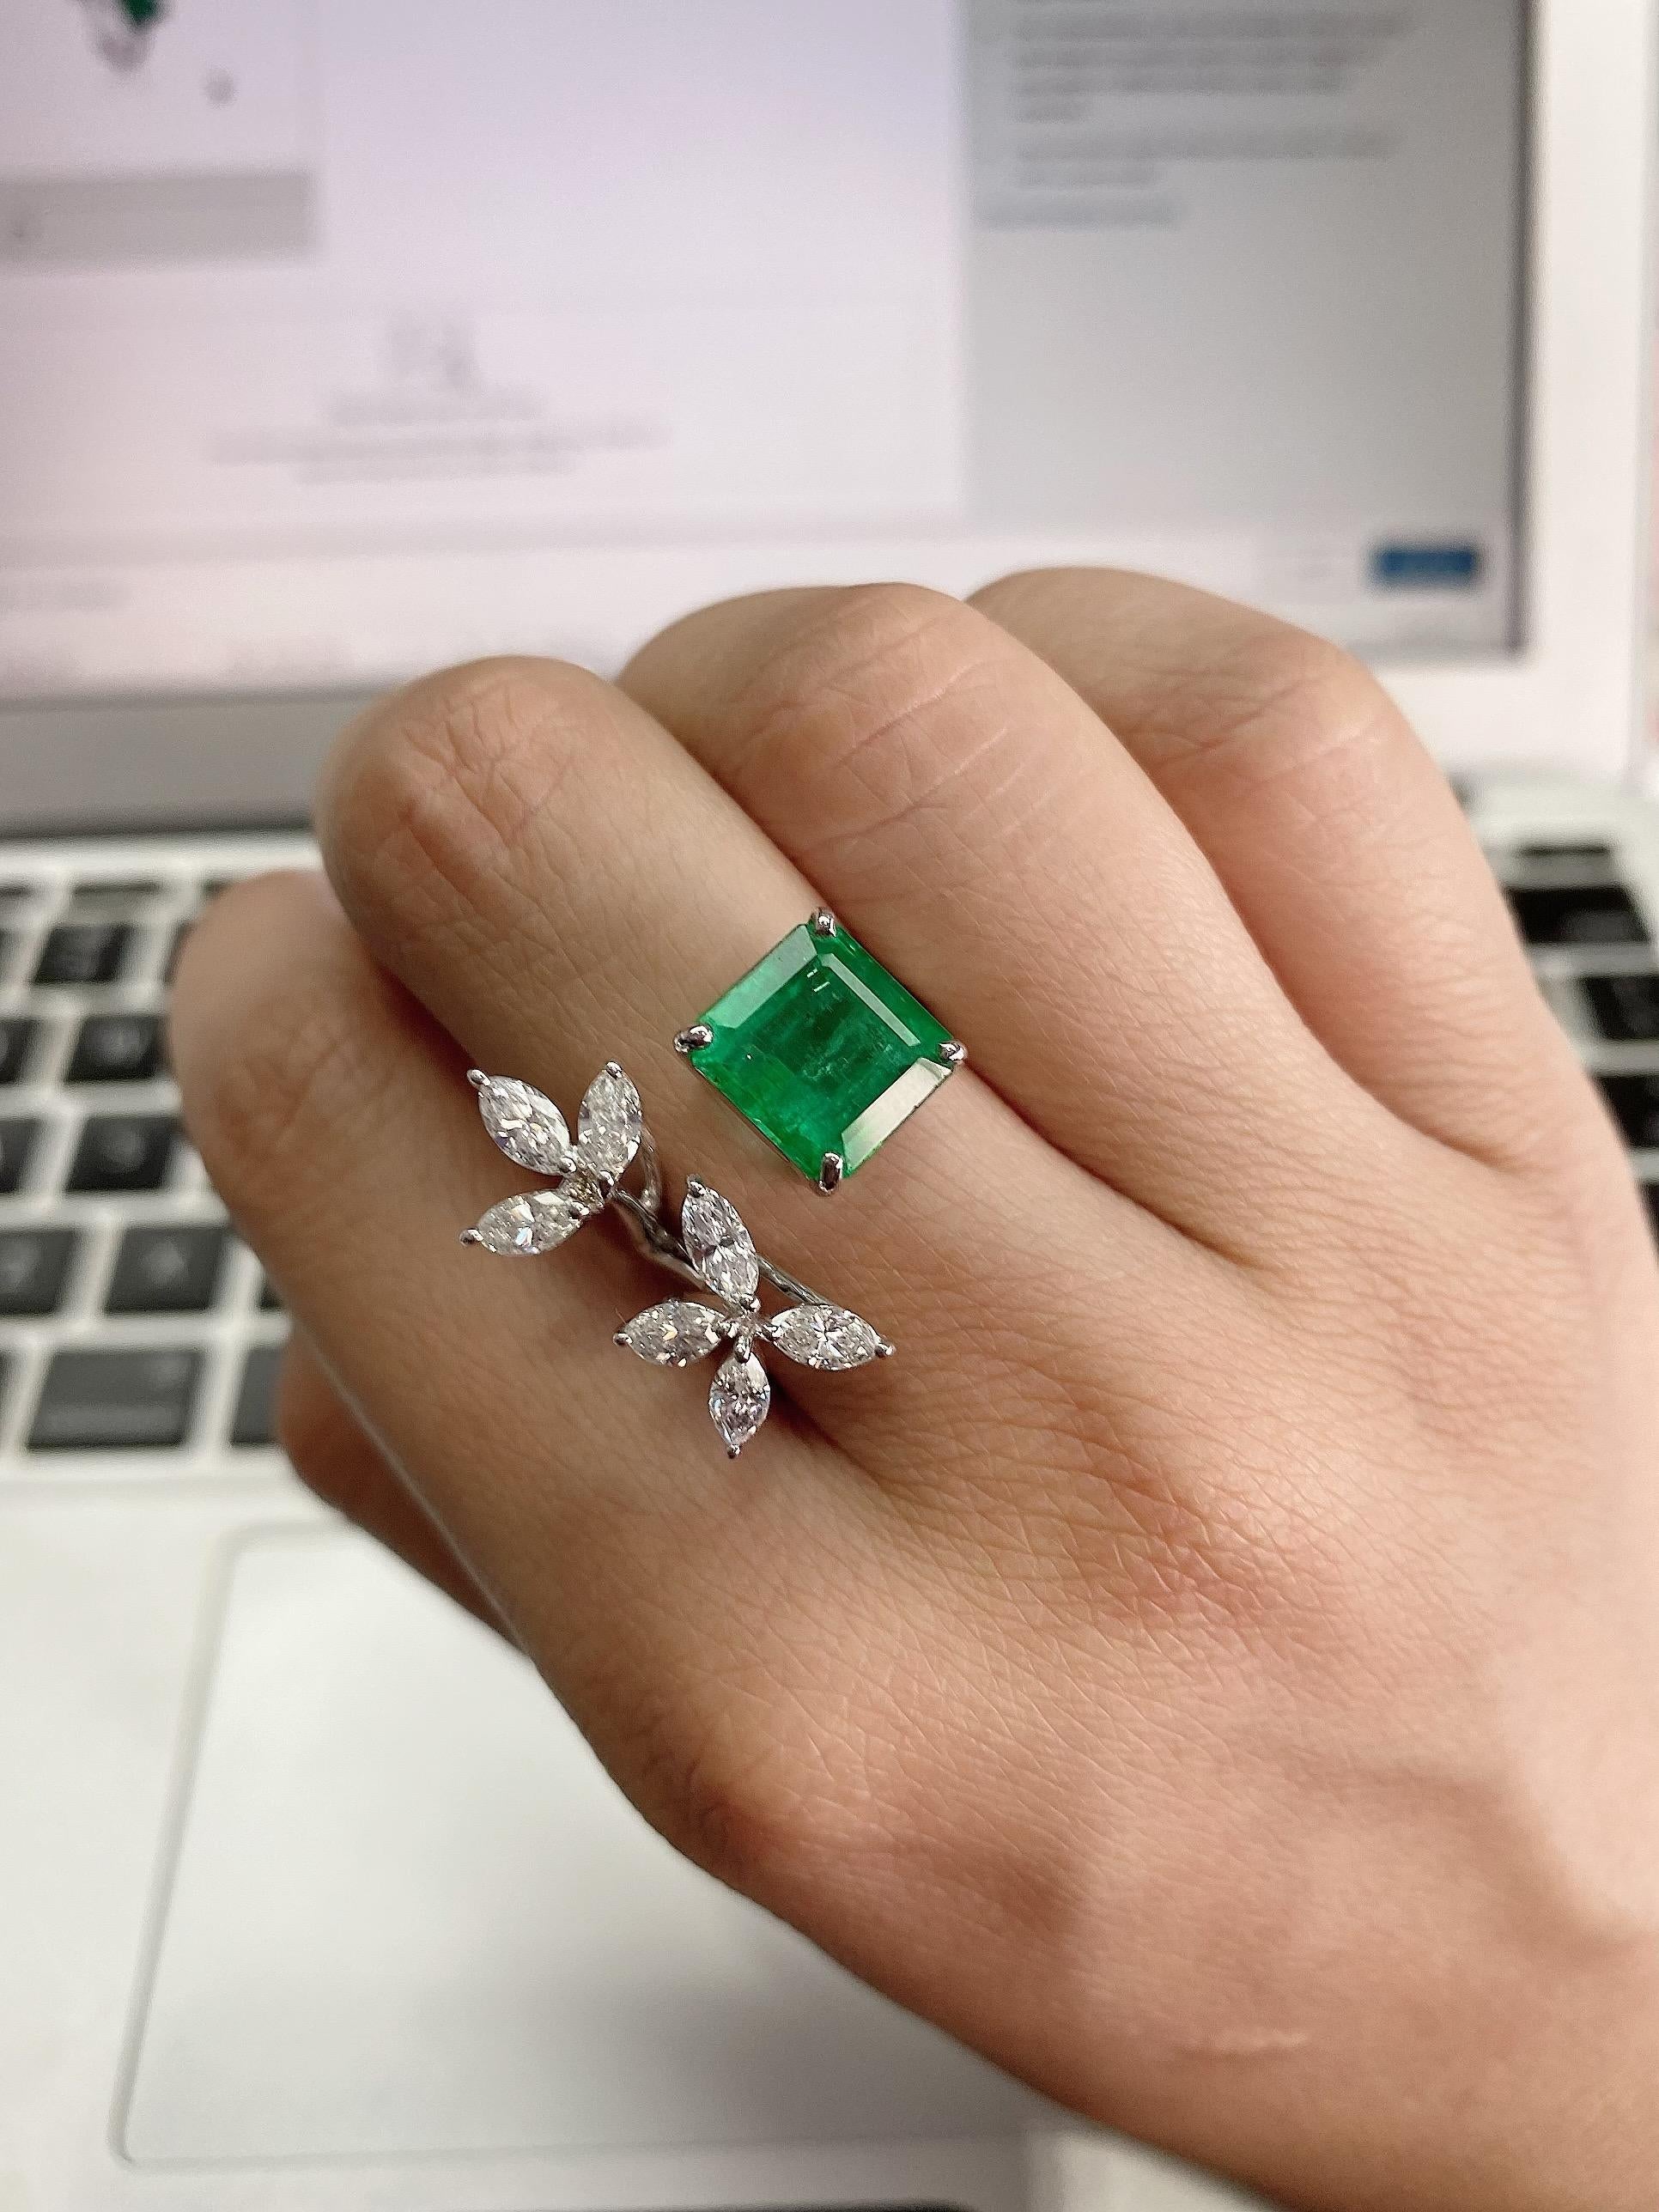 Modern Set in 18k Gold, 4.23 Carat Zambian Emerald and Marquise Diamonds Cocktail Ring